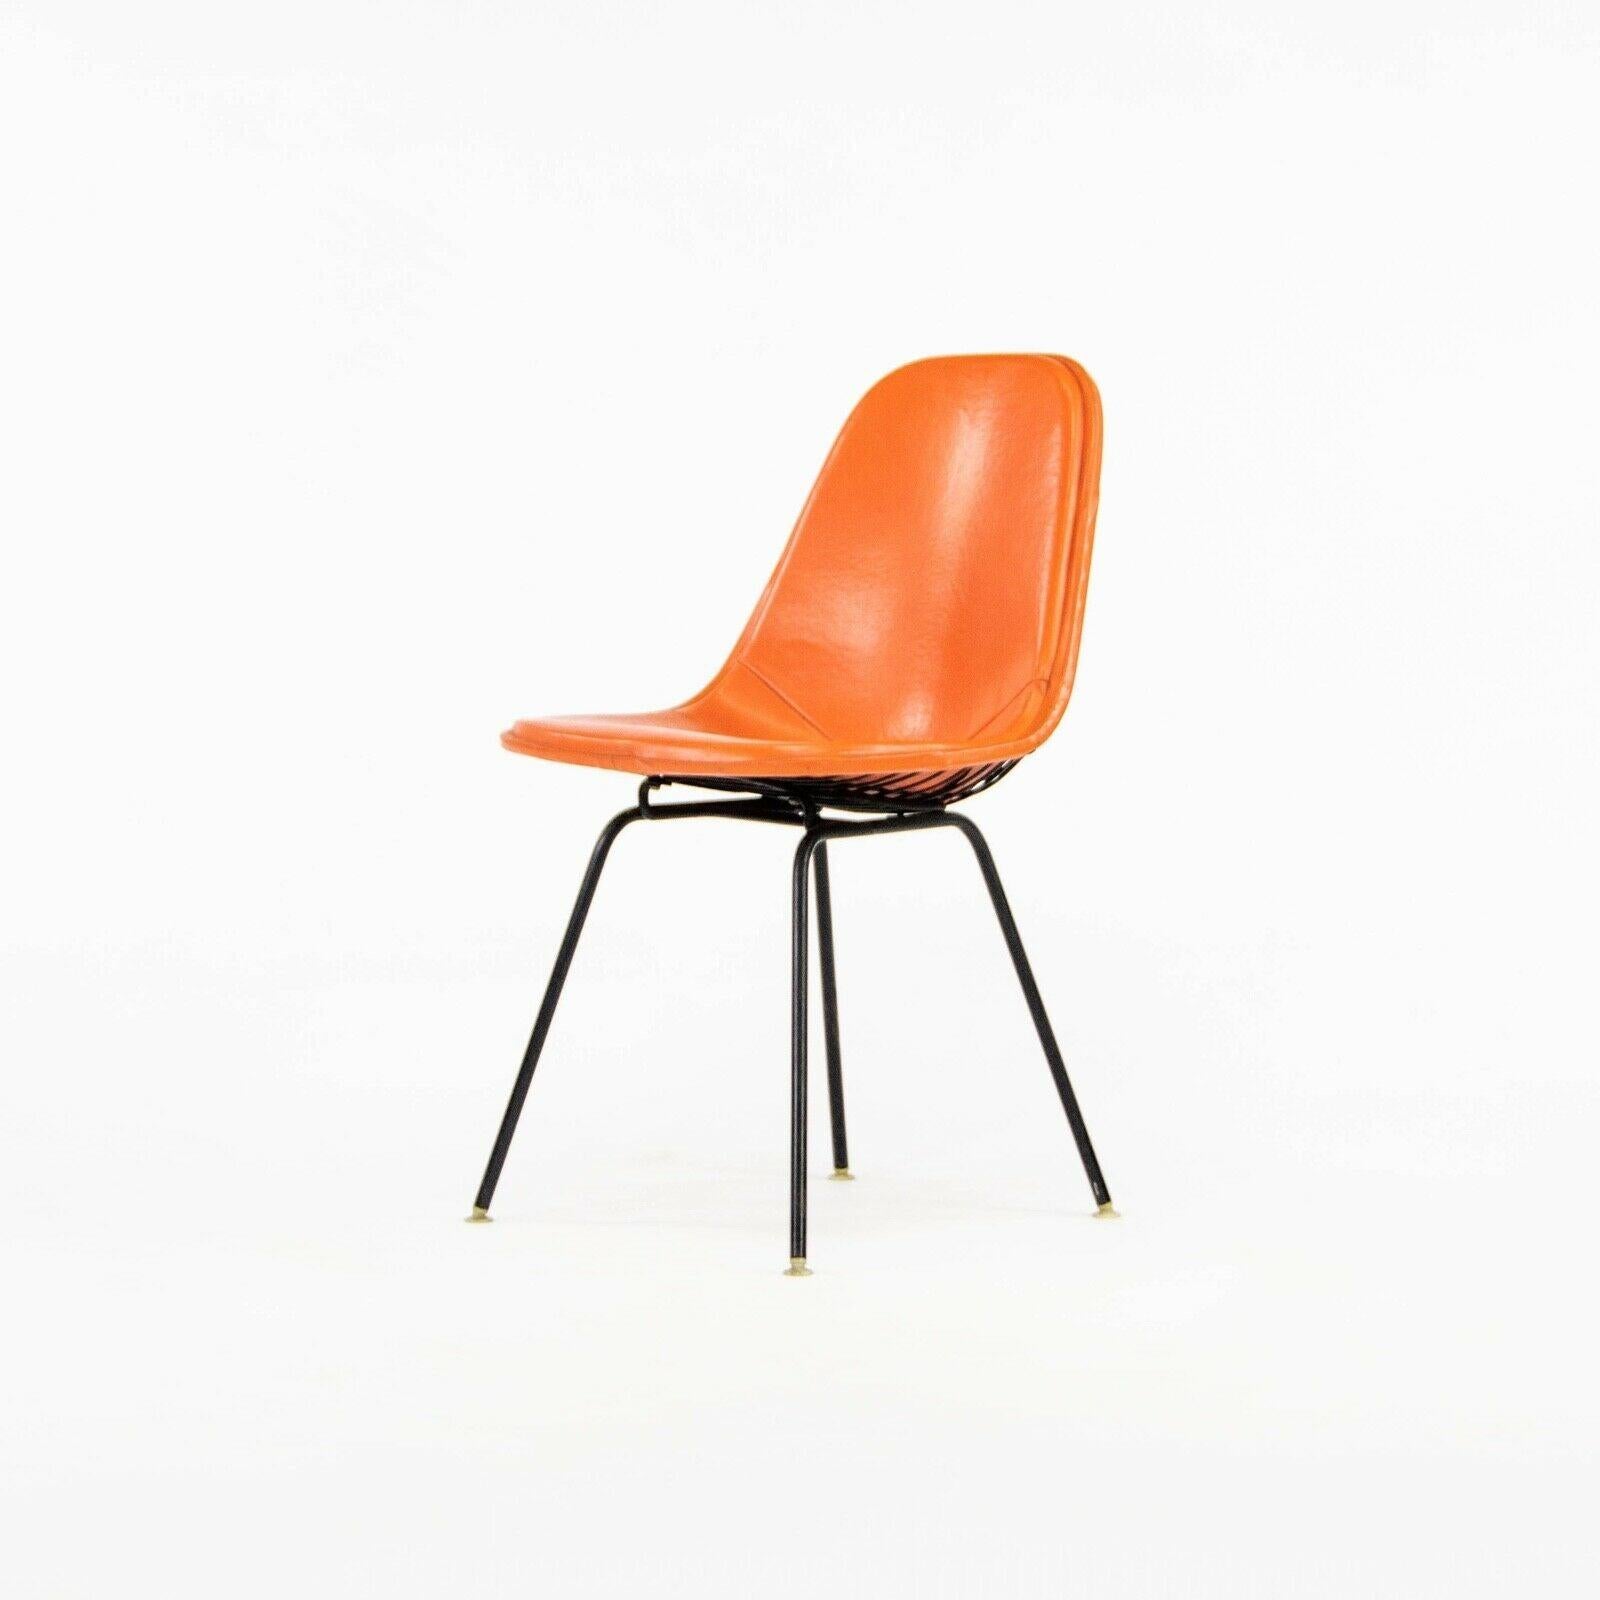 1957 Herman Miller Eames DKX Wire Dining Chair with Full Naugahyde Orange Pad For Sale 1